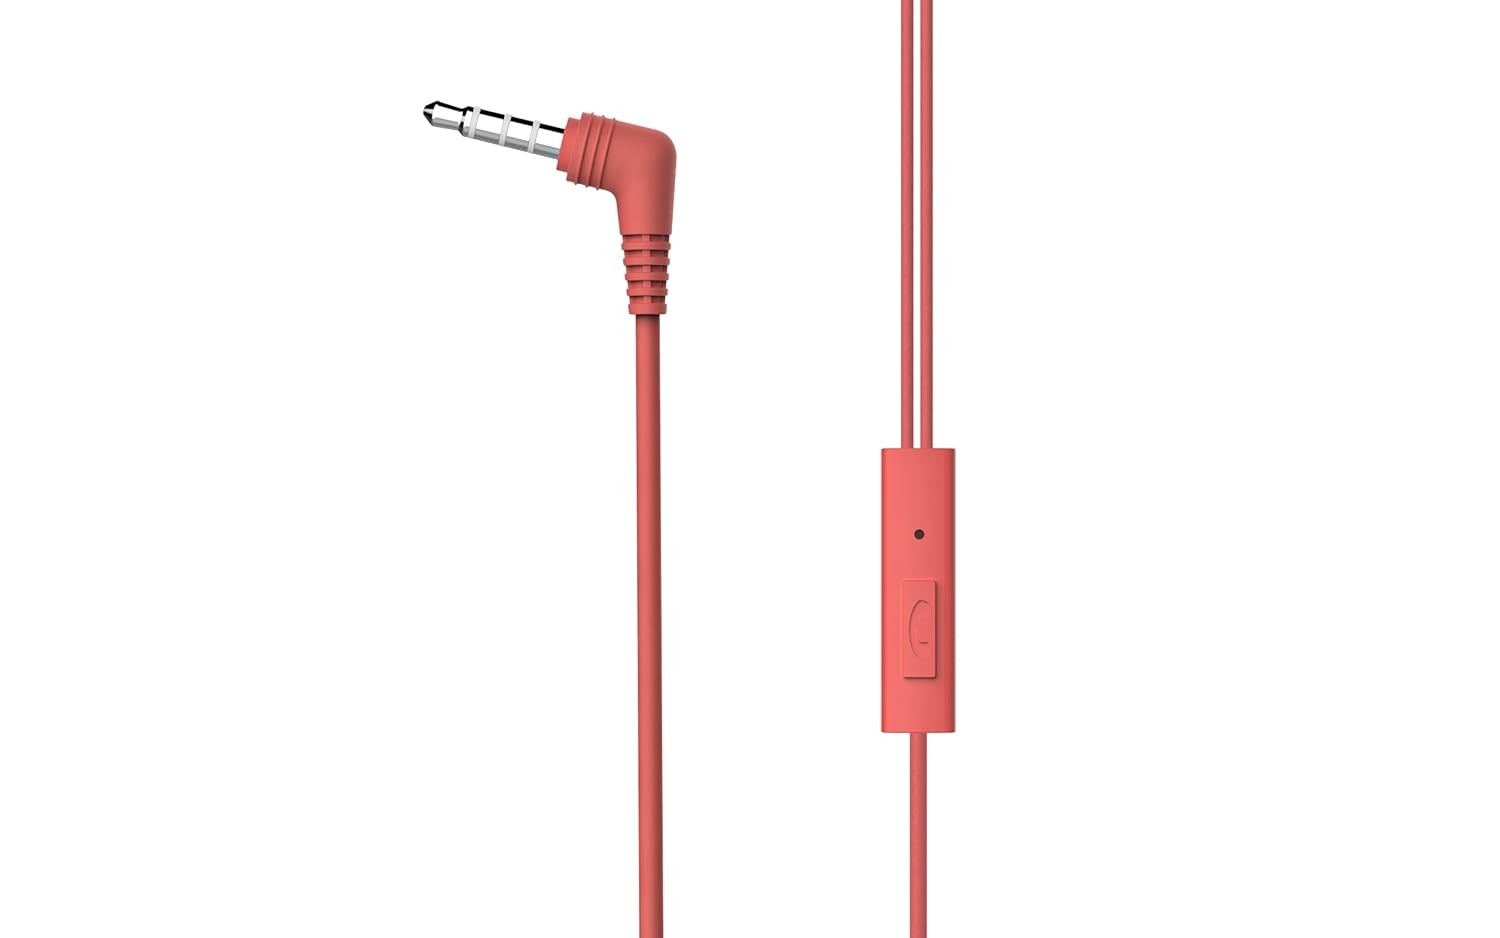 Nokia Buds (Wb-101) Powerful Bass Performance Wired In Ear Earphones With Mic For Clear Voice Calls, Virtual Assistant Control Enabled Angled Acoustic Tubes For A Comfortable And Secure Fit, Red